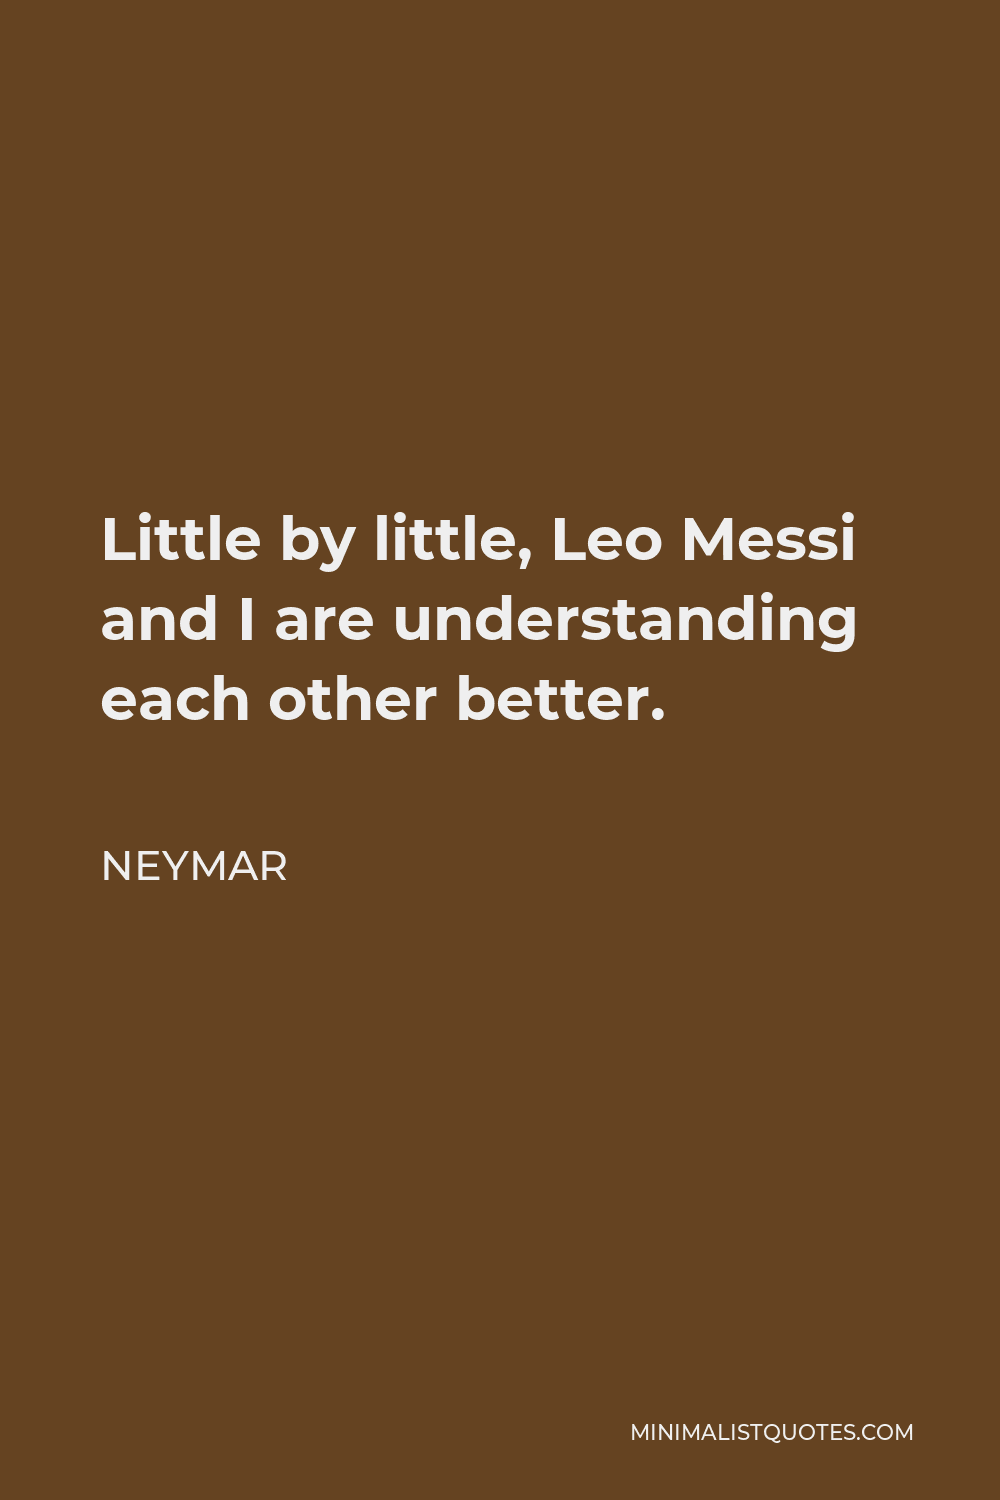 Neymar Quote - Little by little, Leo Messi and I are understanding each other better.